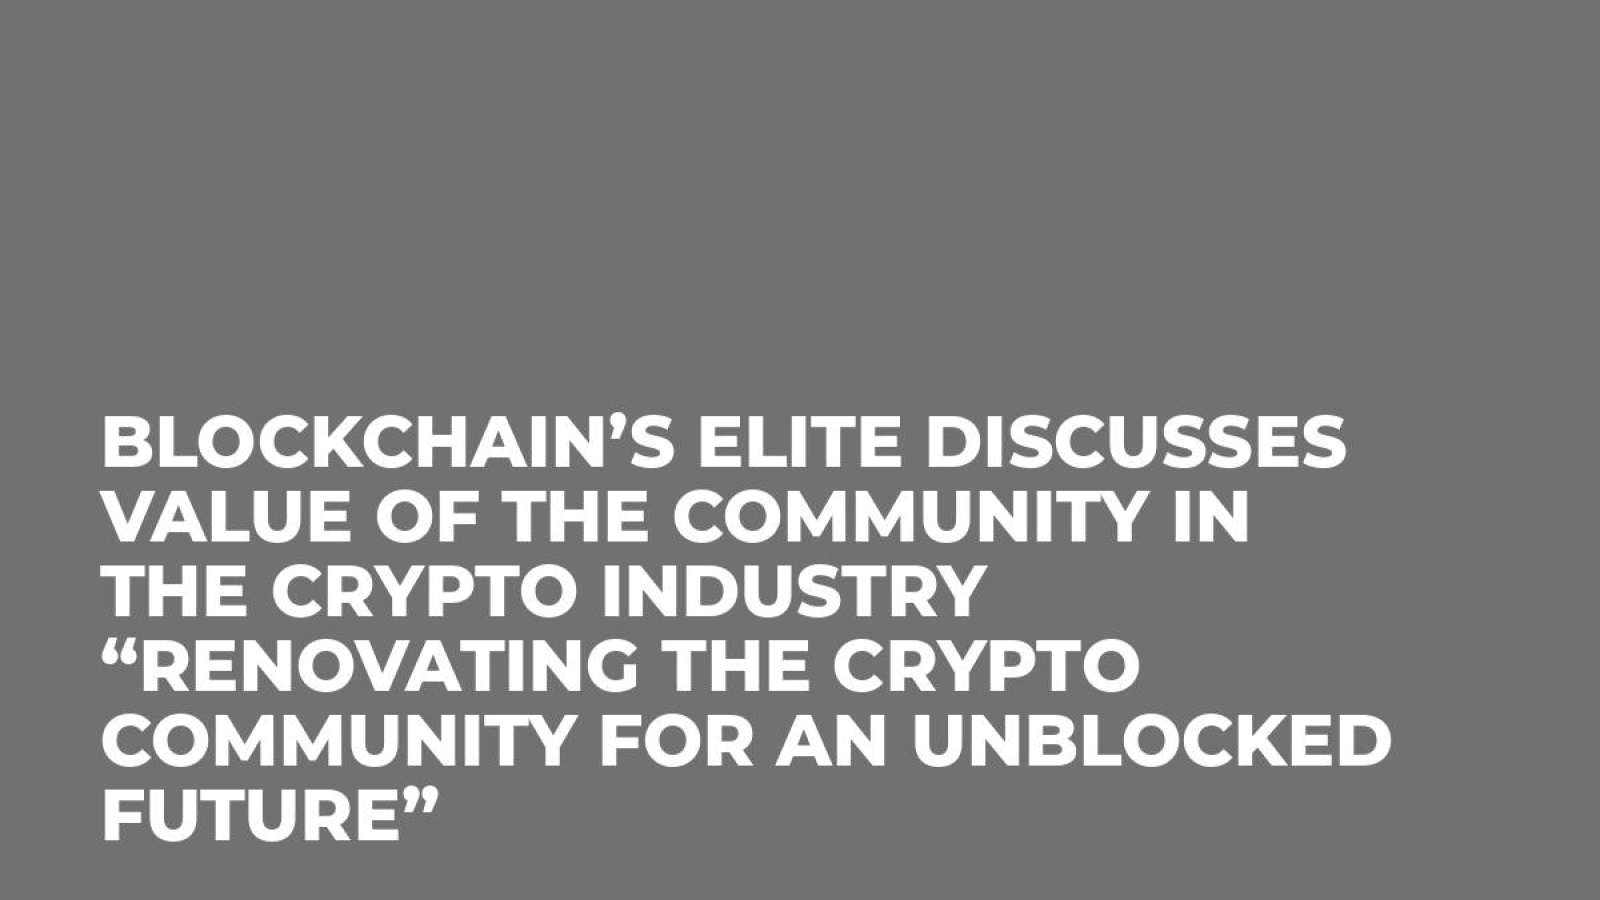 Blockchain’s elite discusses value of the community in the crypto industry “Renovating the Crypto Community for an Unblocked Future”